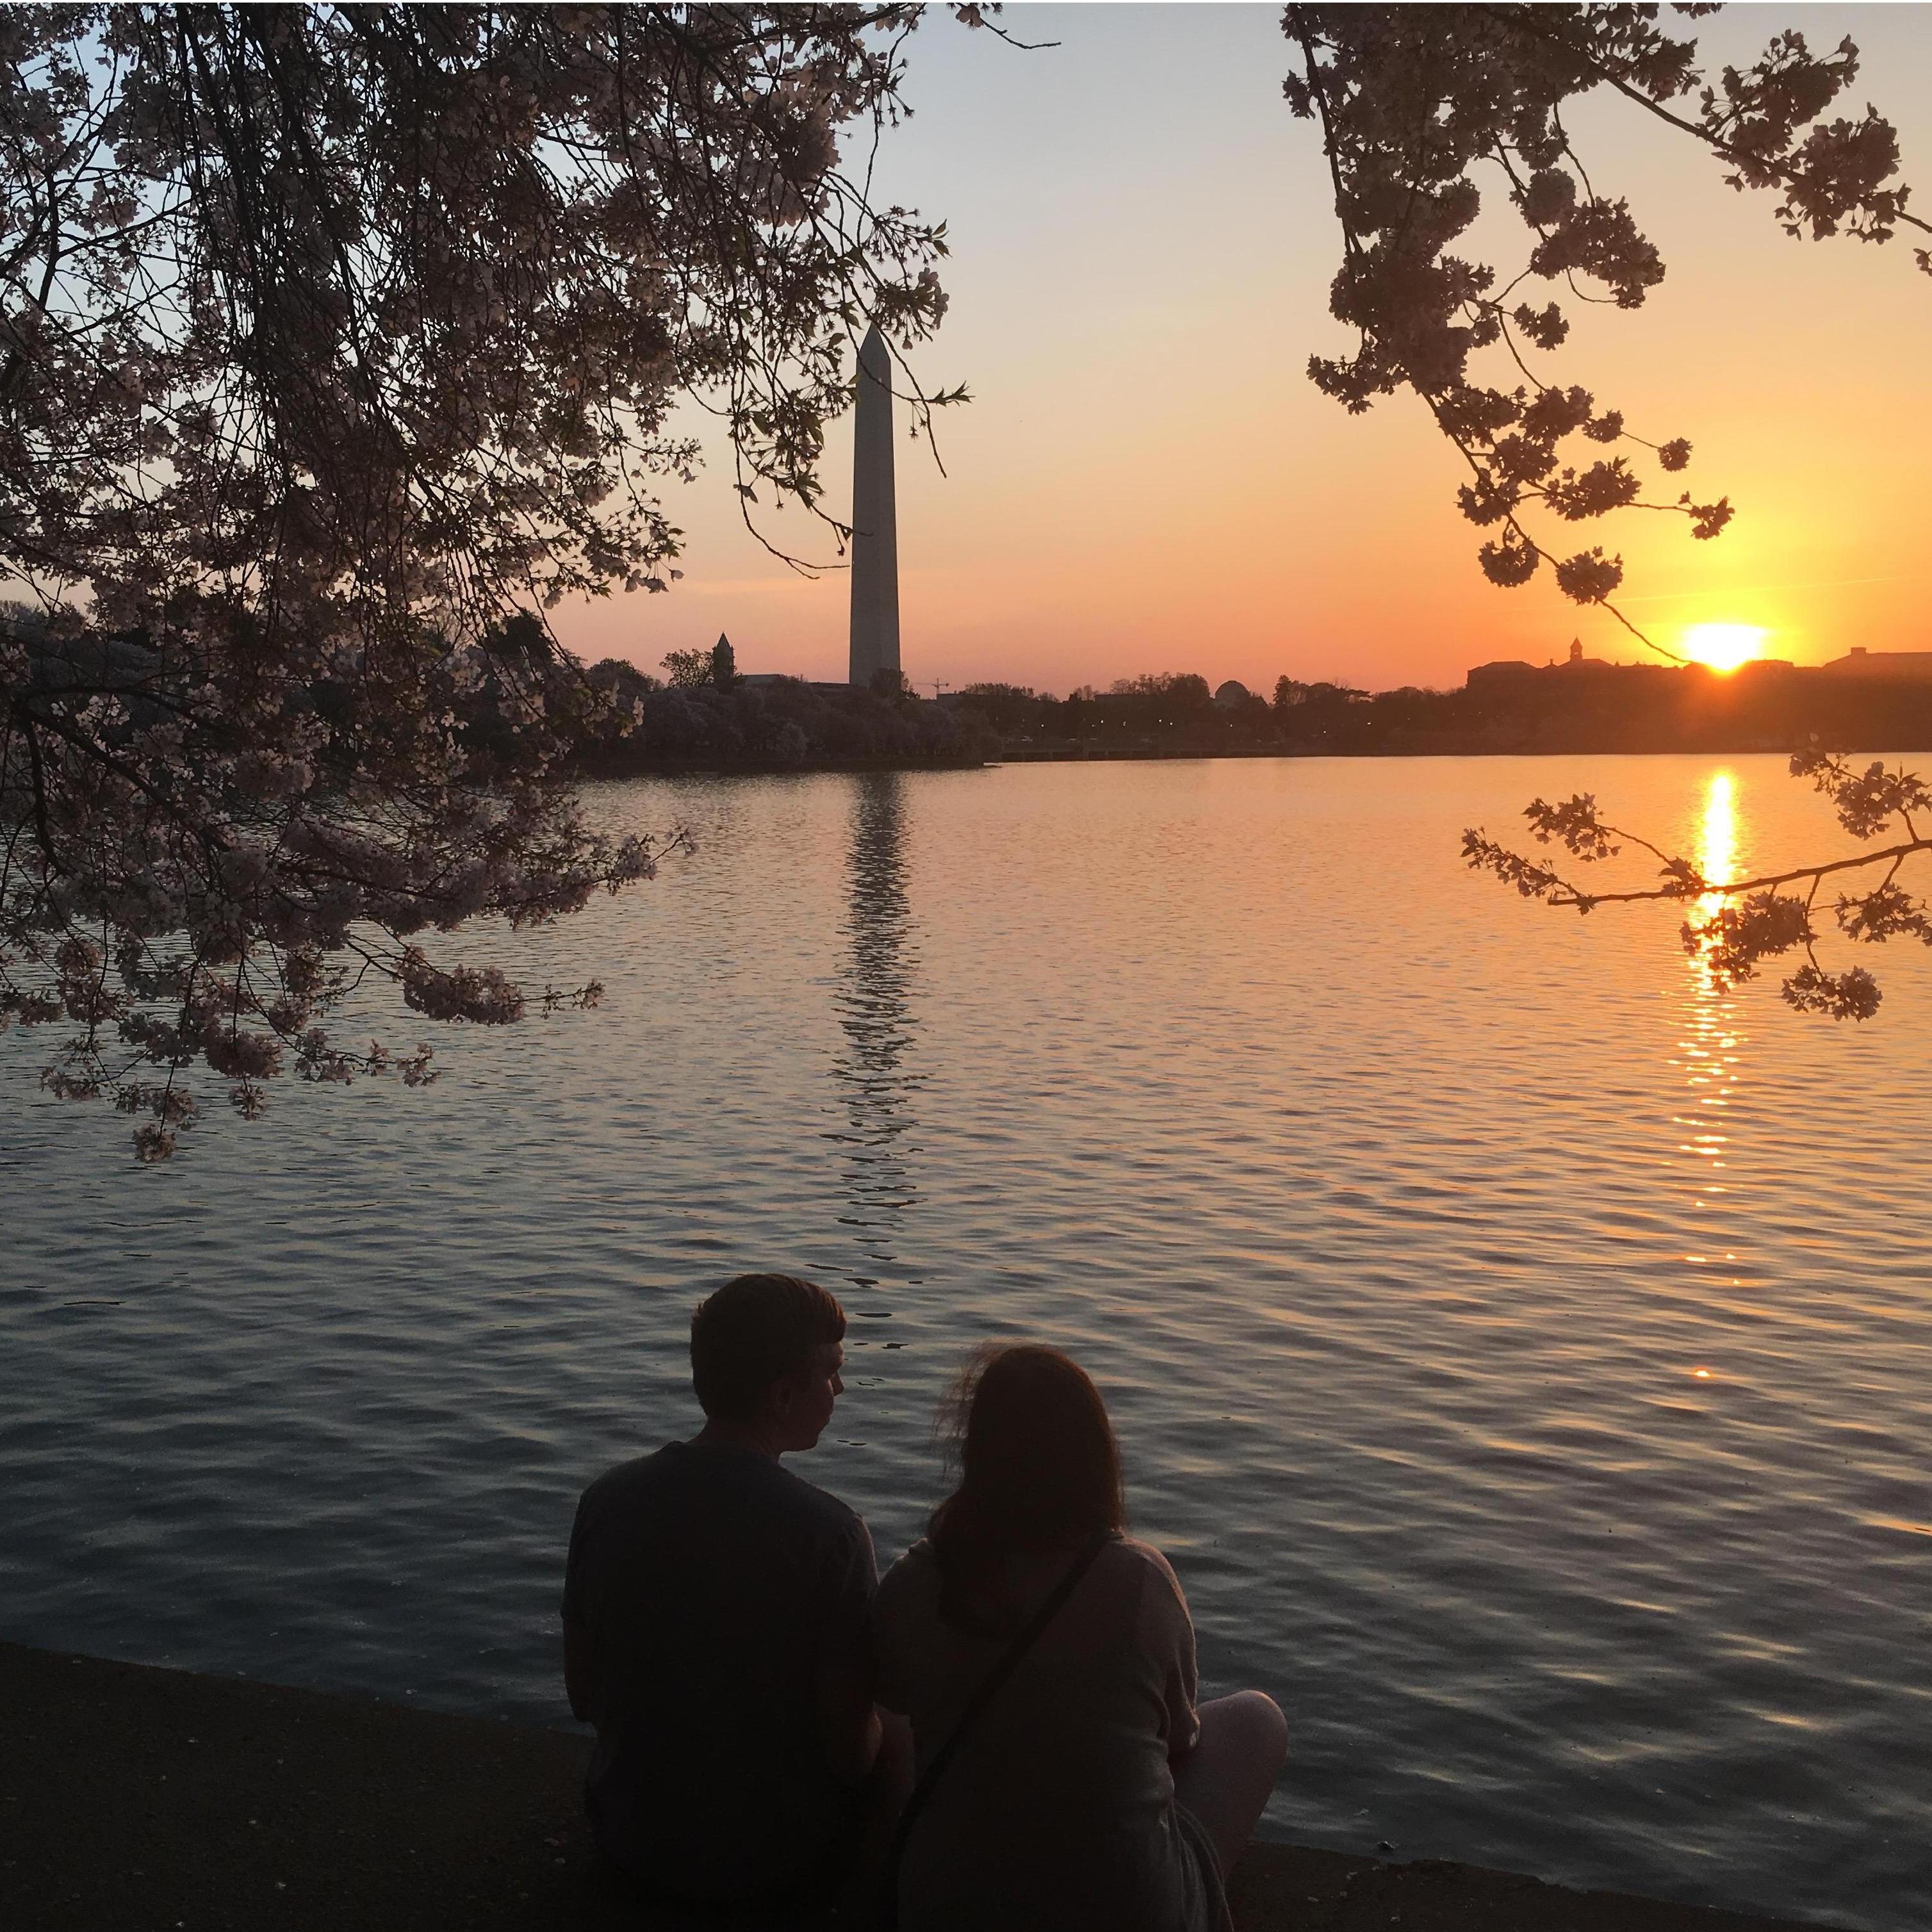 We got up at 5 am to catch the sunrise over the Tidal Basin with some friends where years later we took our formal engagement photos.